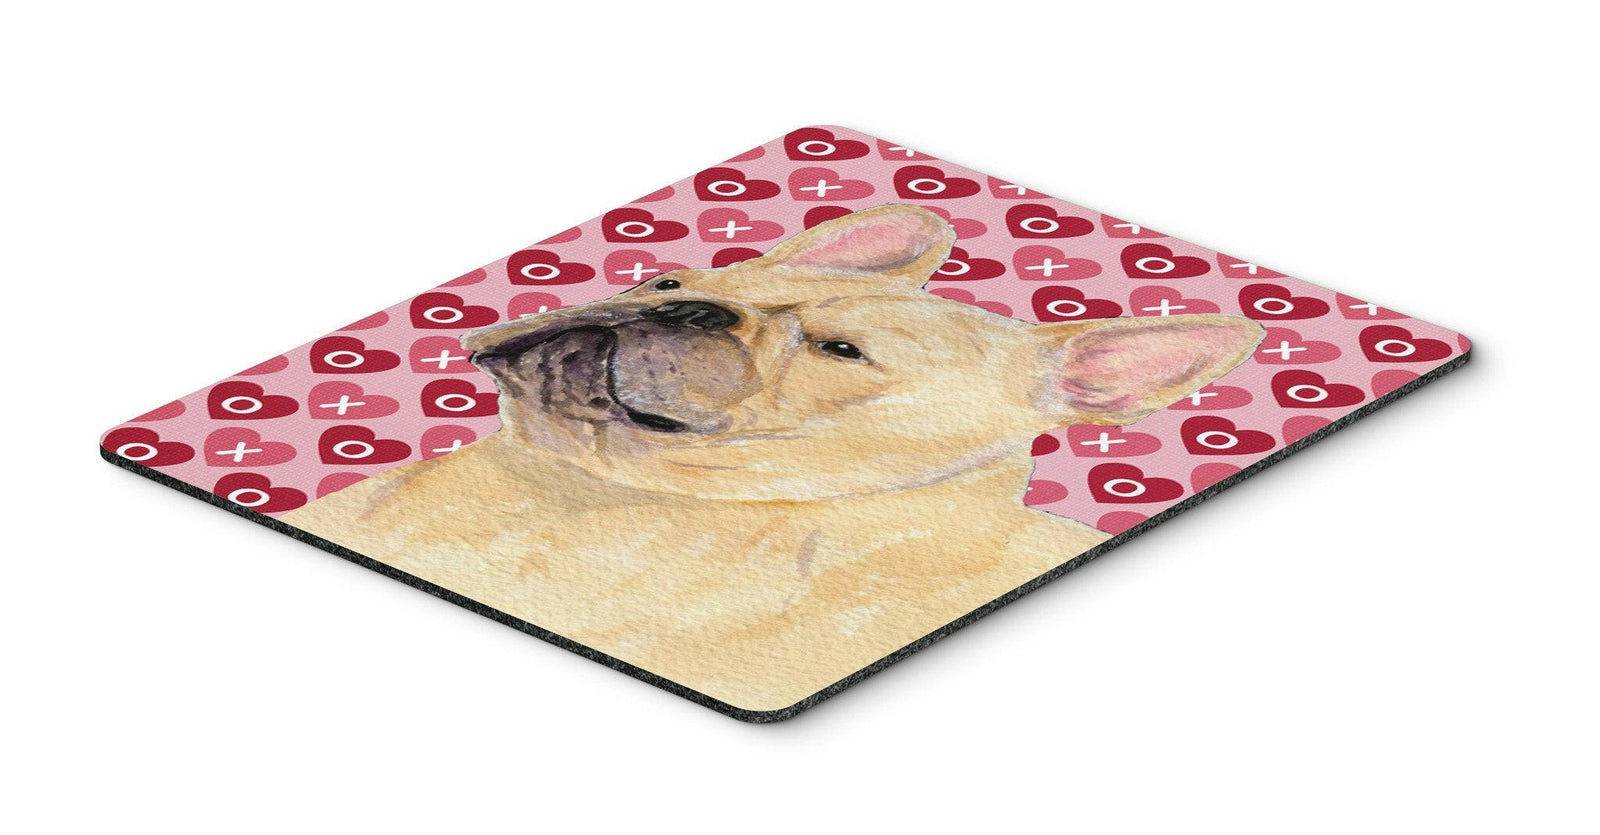 French Bulldog Hearts Love and Valentine's Day  Mouse Pad, Hot Pad or Trivet by Caroline's Treasures